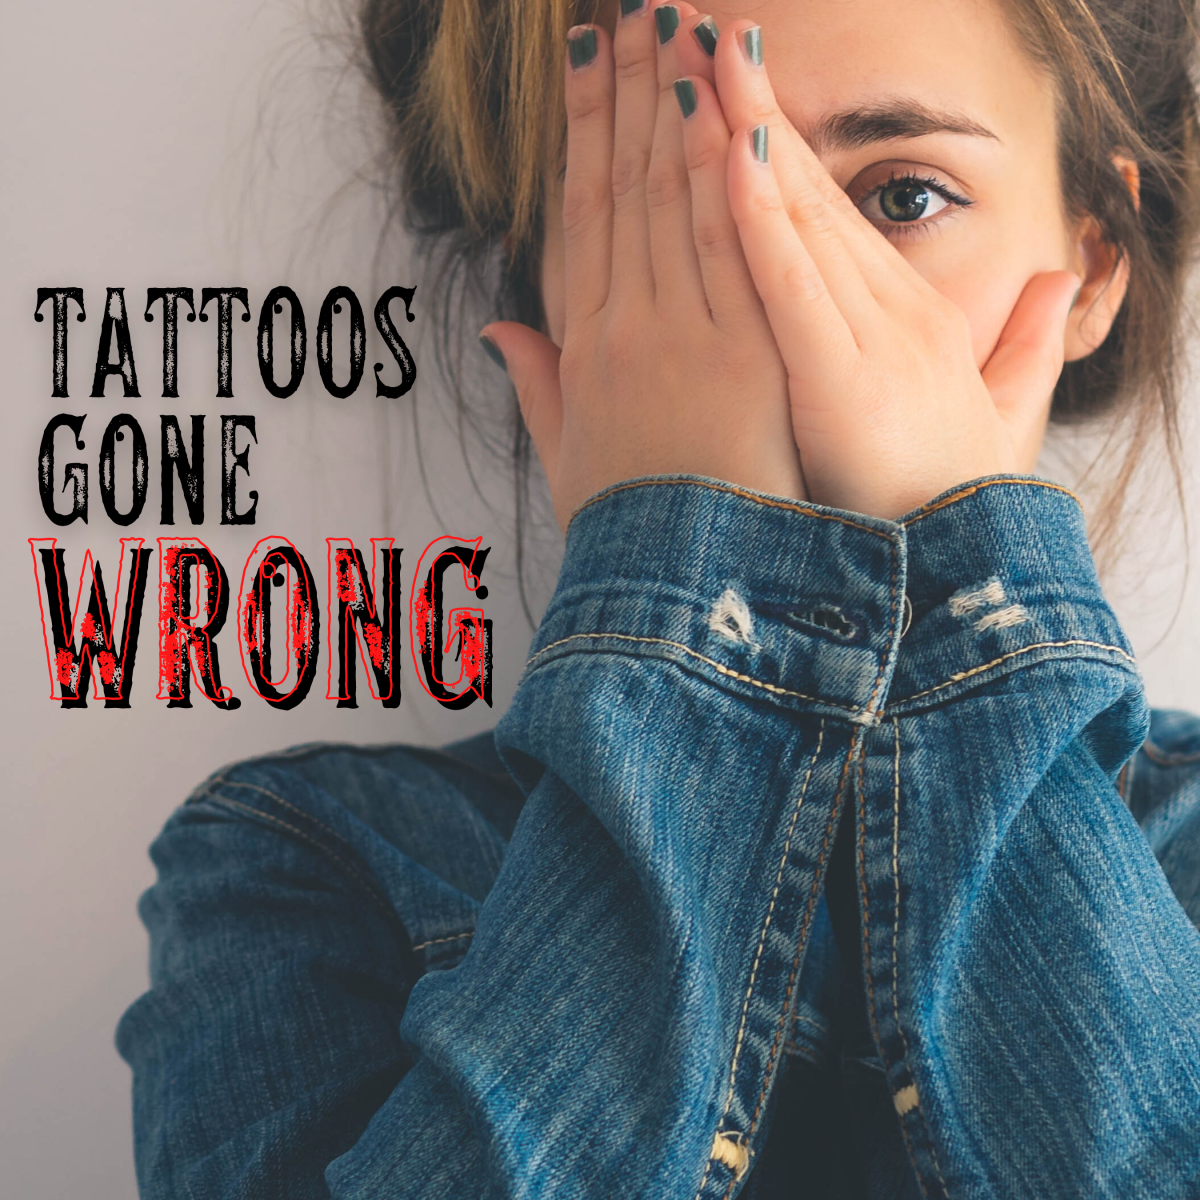 Tattoos Gone Wrong (and What to Do With a Bad Tattoo) - TatRing